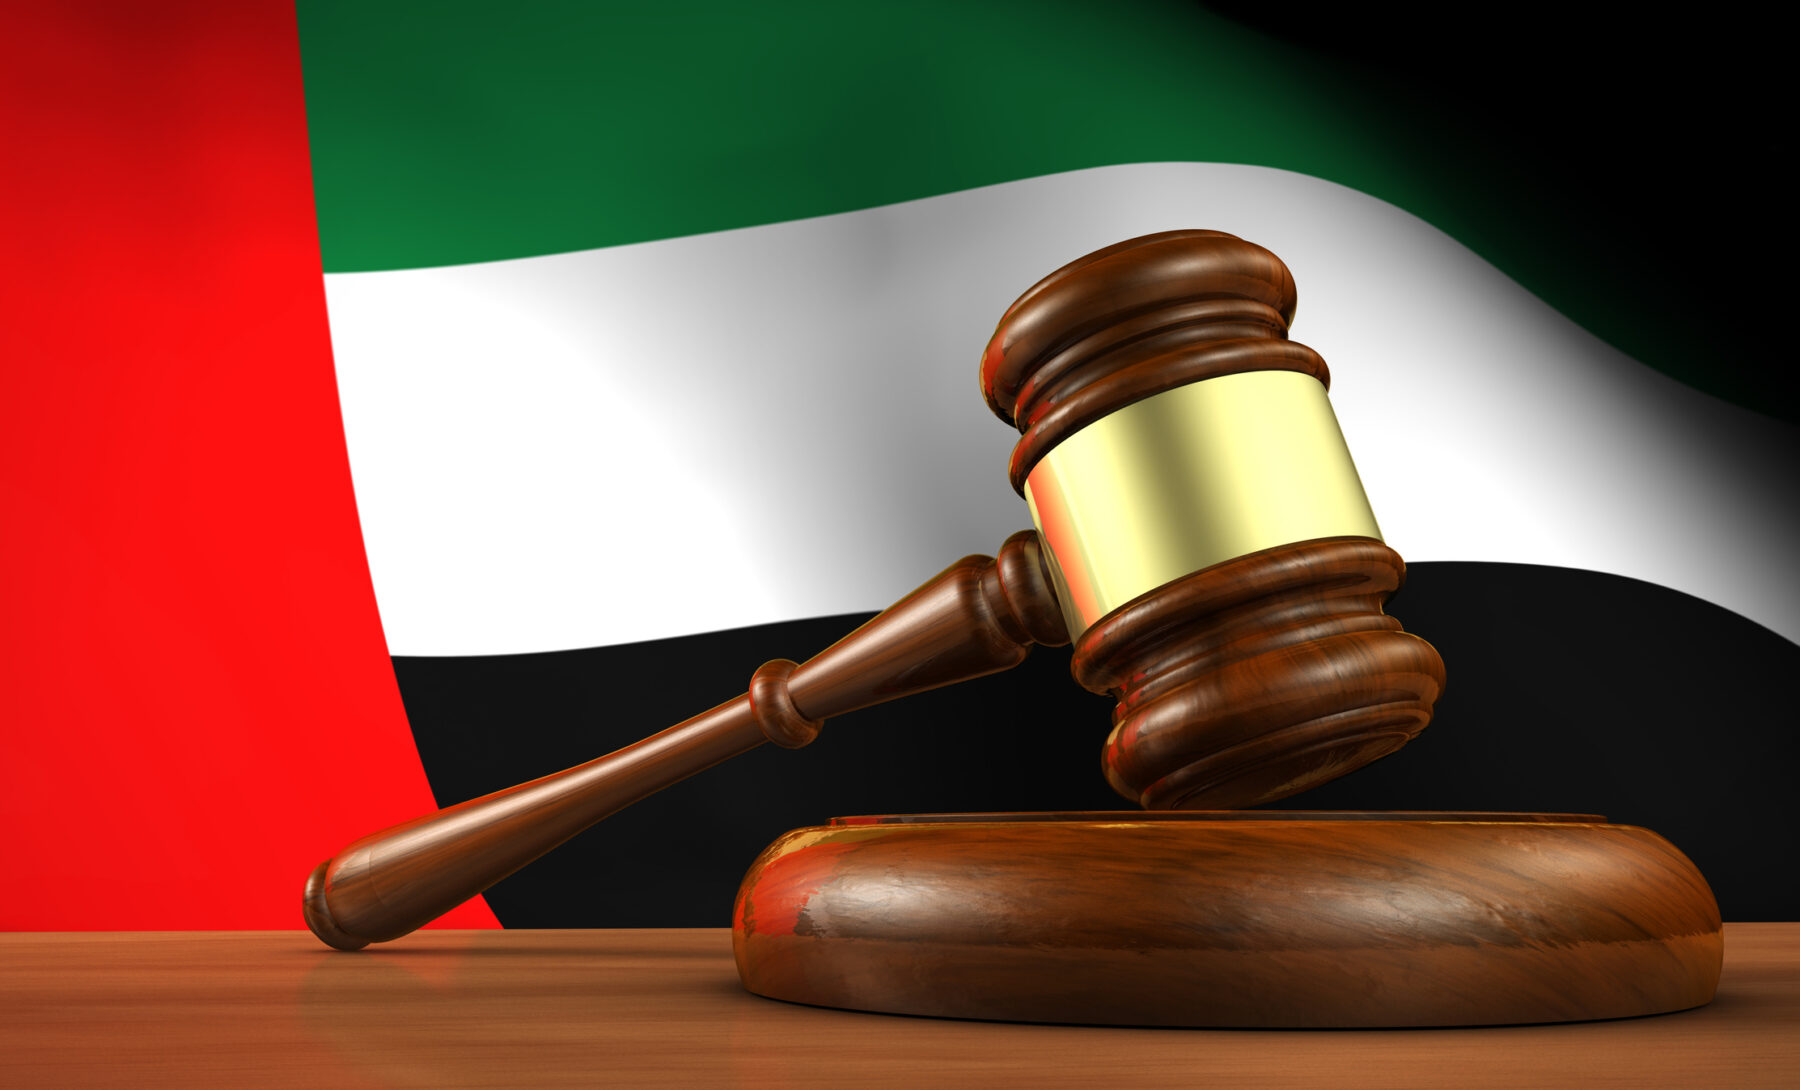 The Differences Between Arbitration and Litigation In The UAE